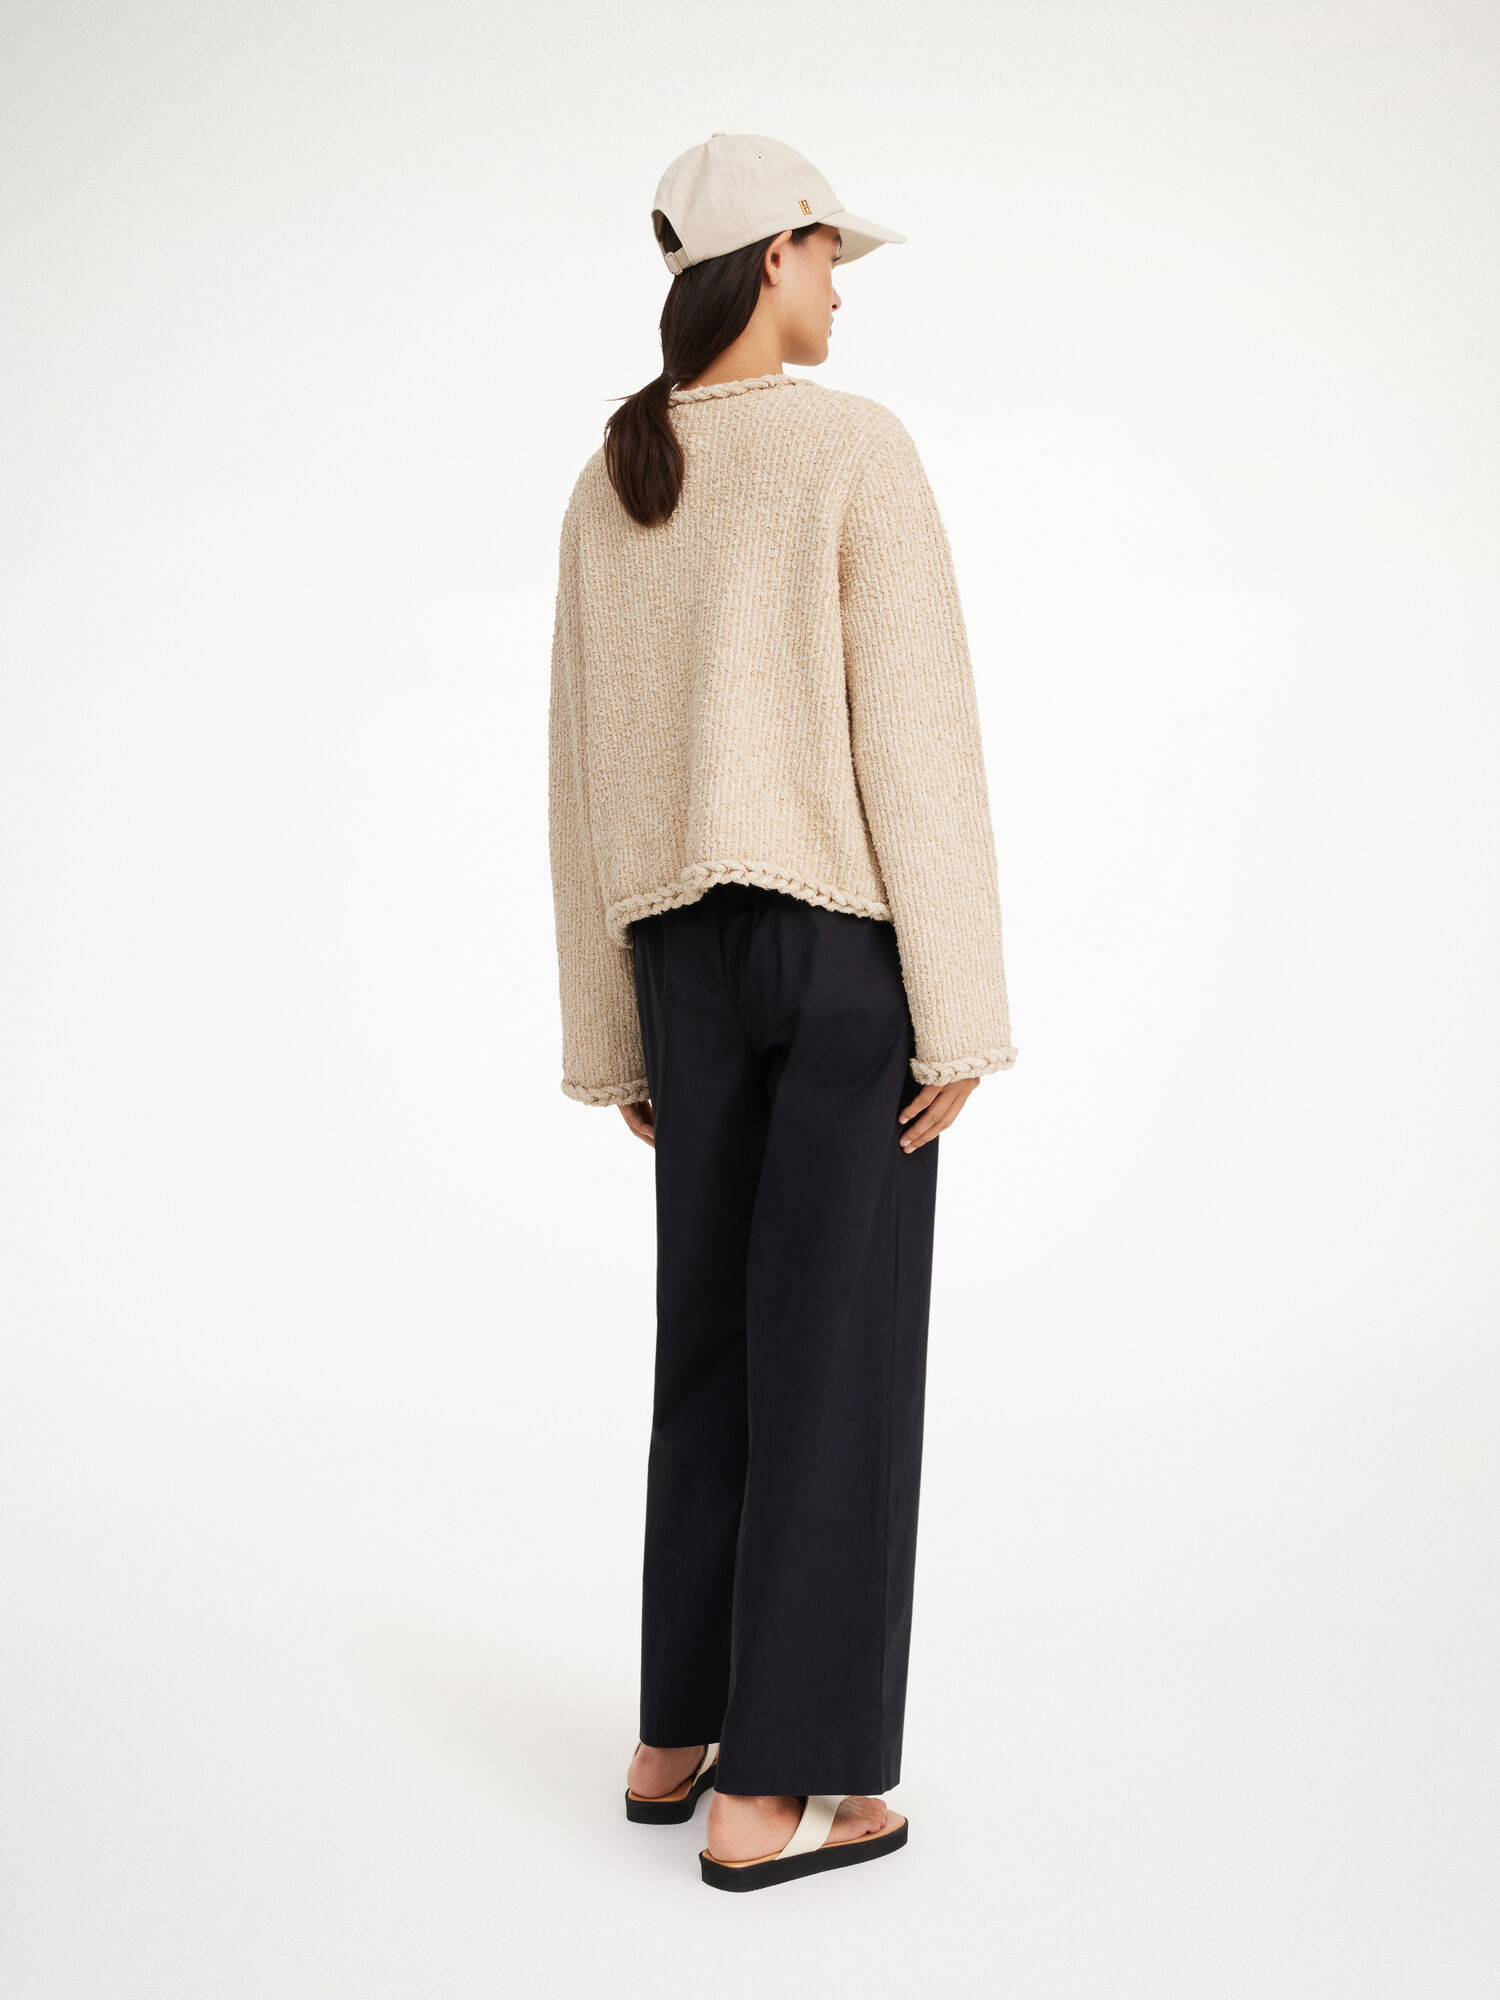 Ely Trousers in Brushed Organic Cotton